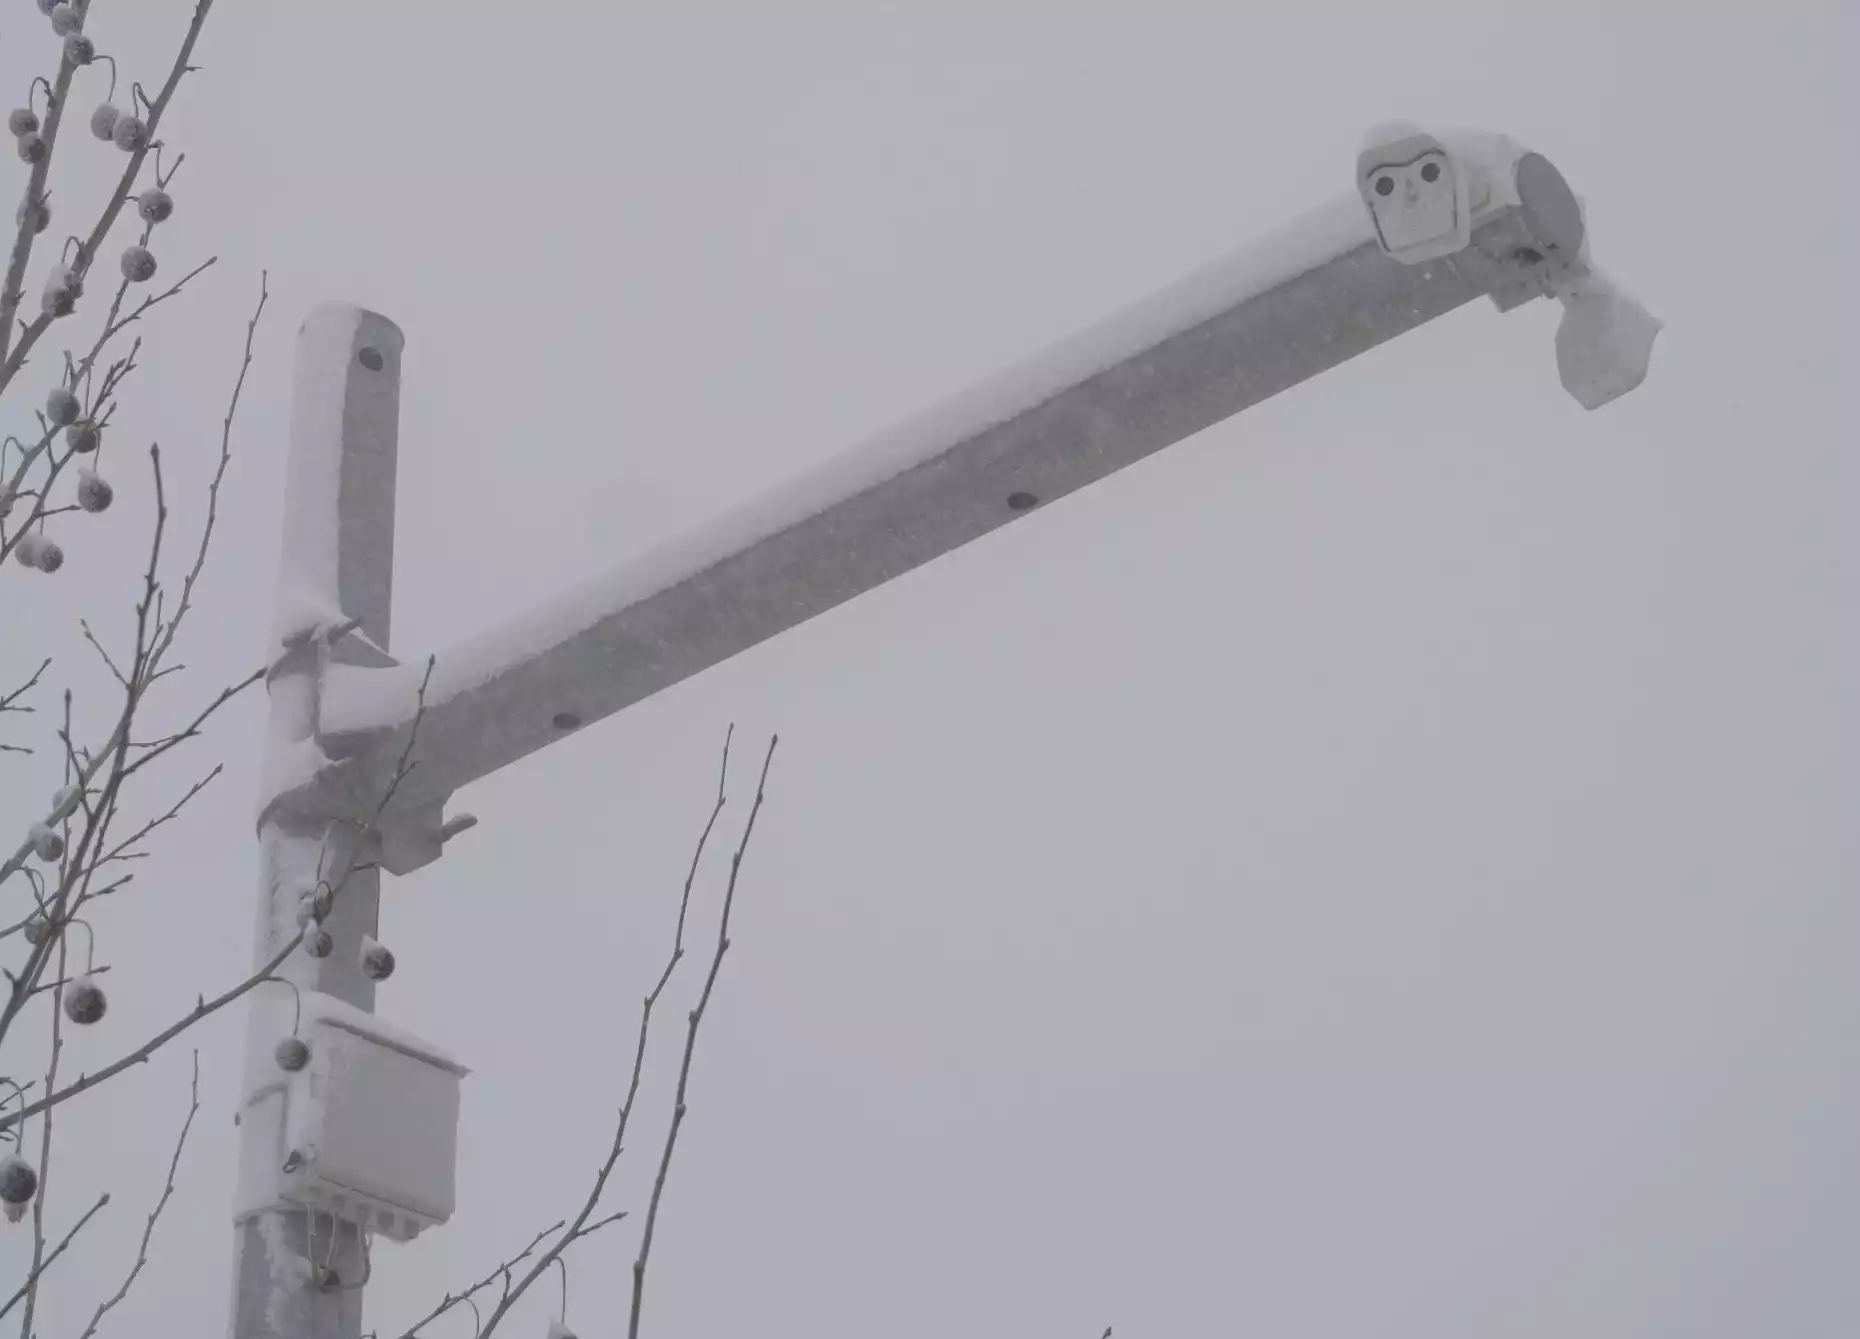 Mobotix camera configuration in the snow